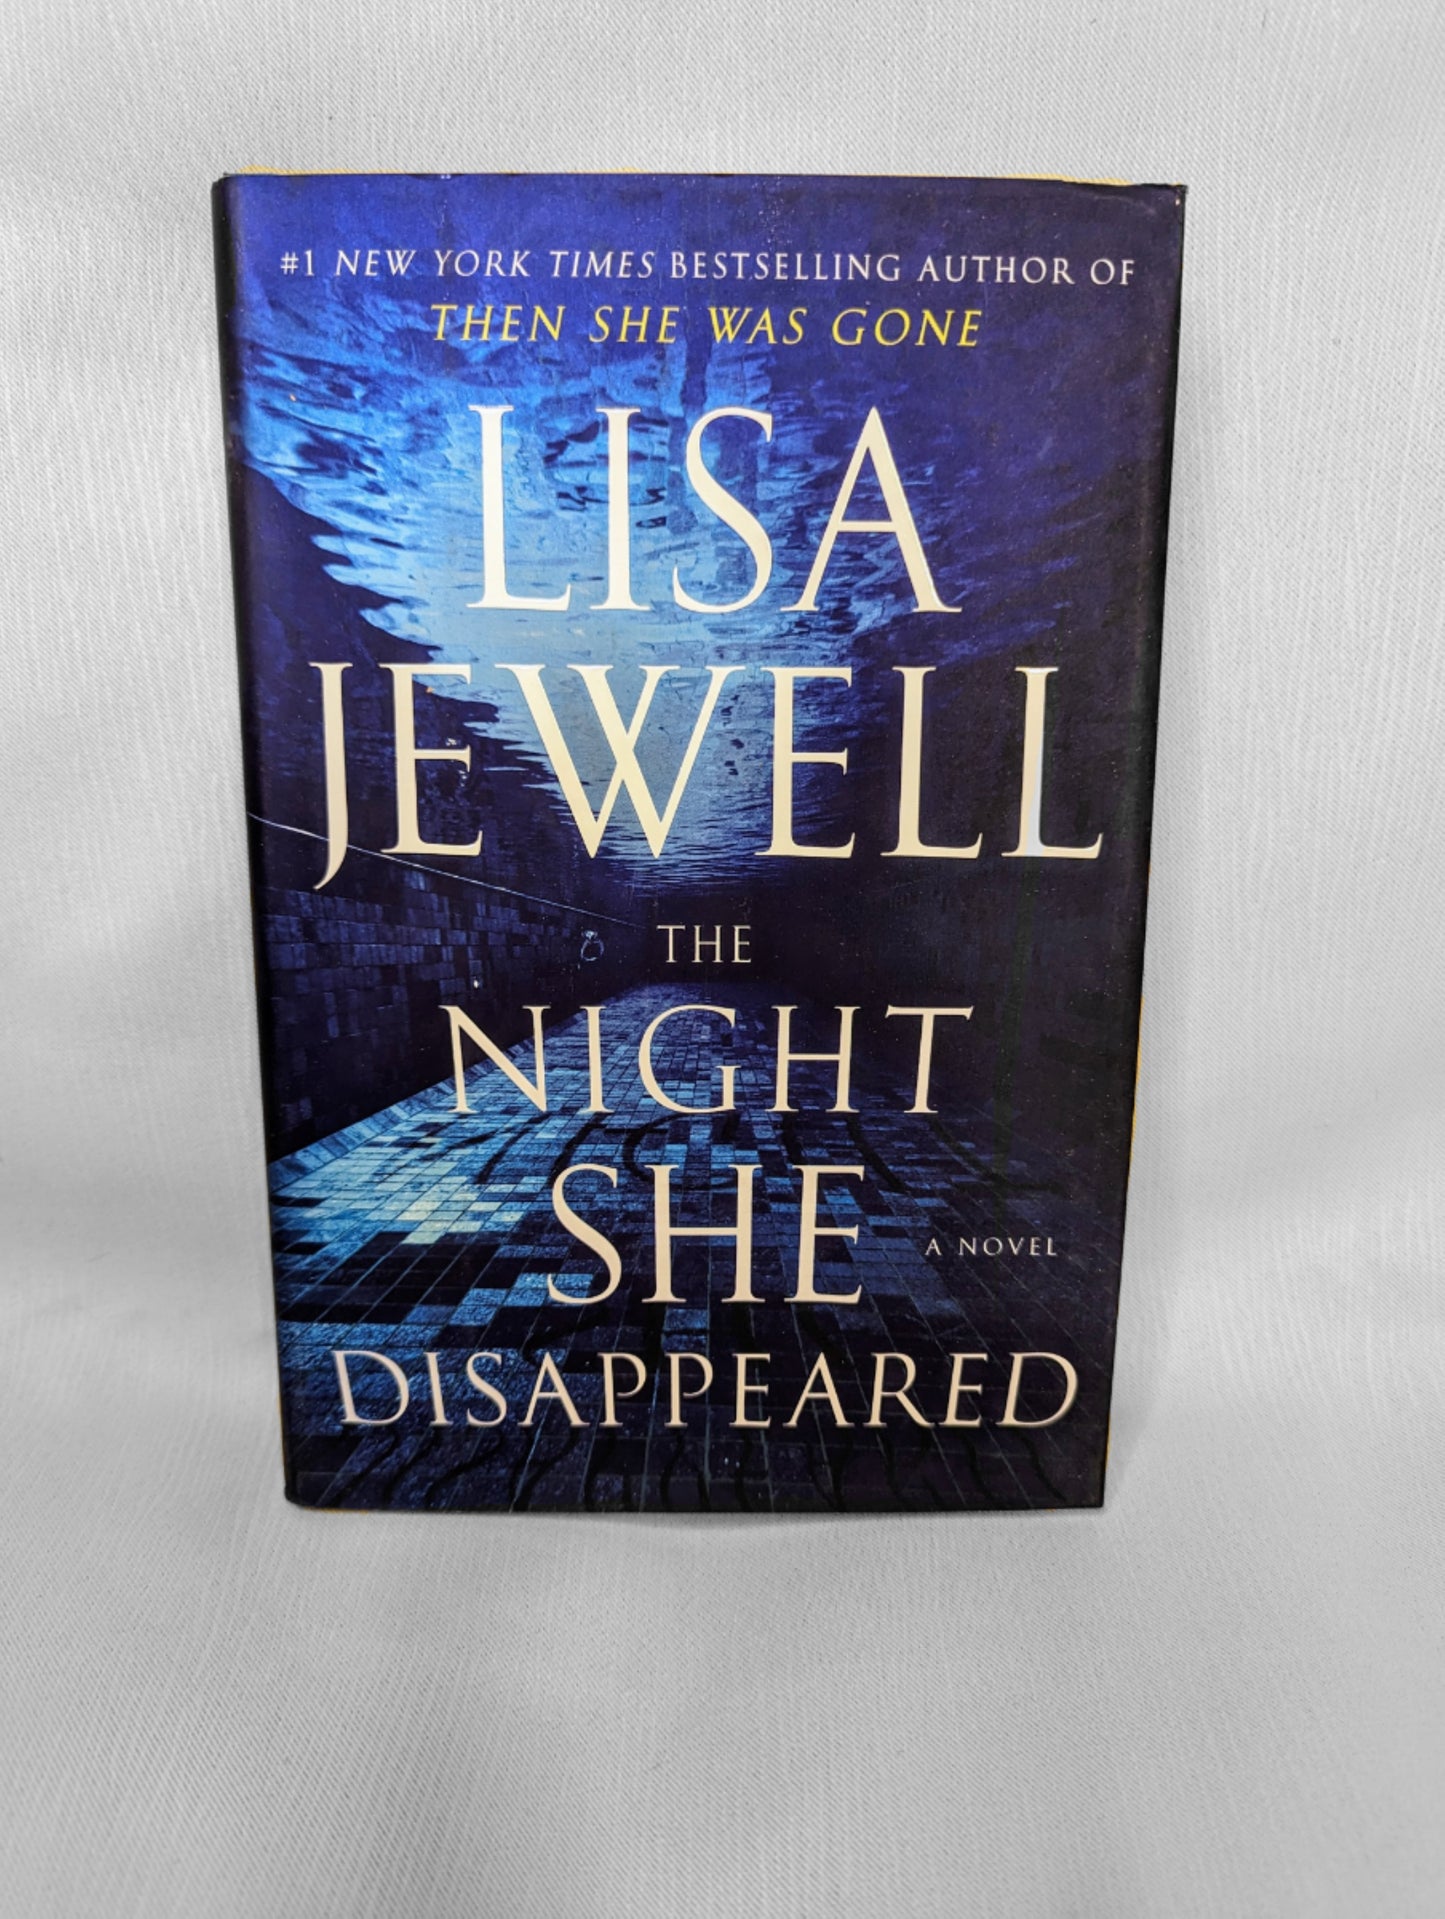 The Night She Disappeared by Lisa Jewell